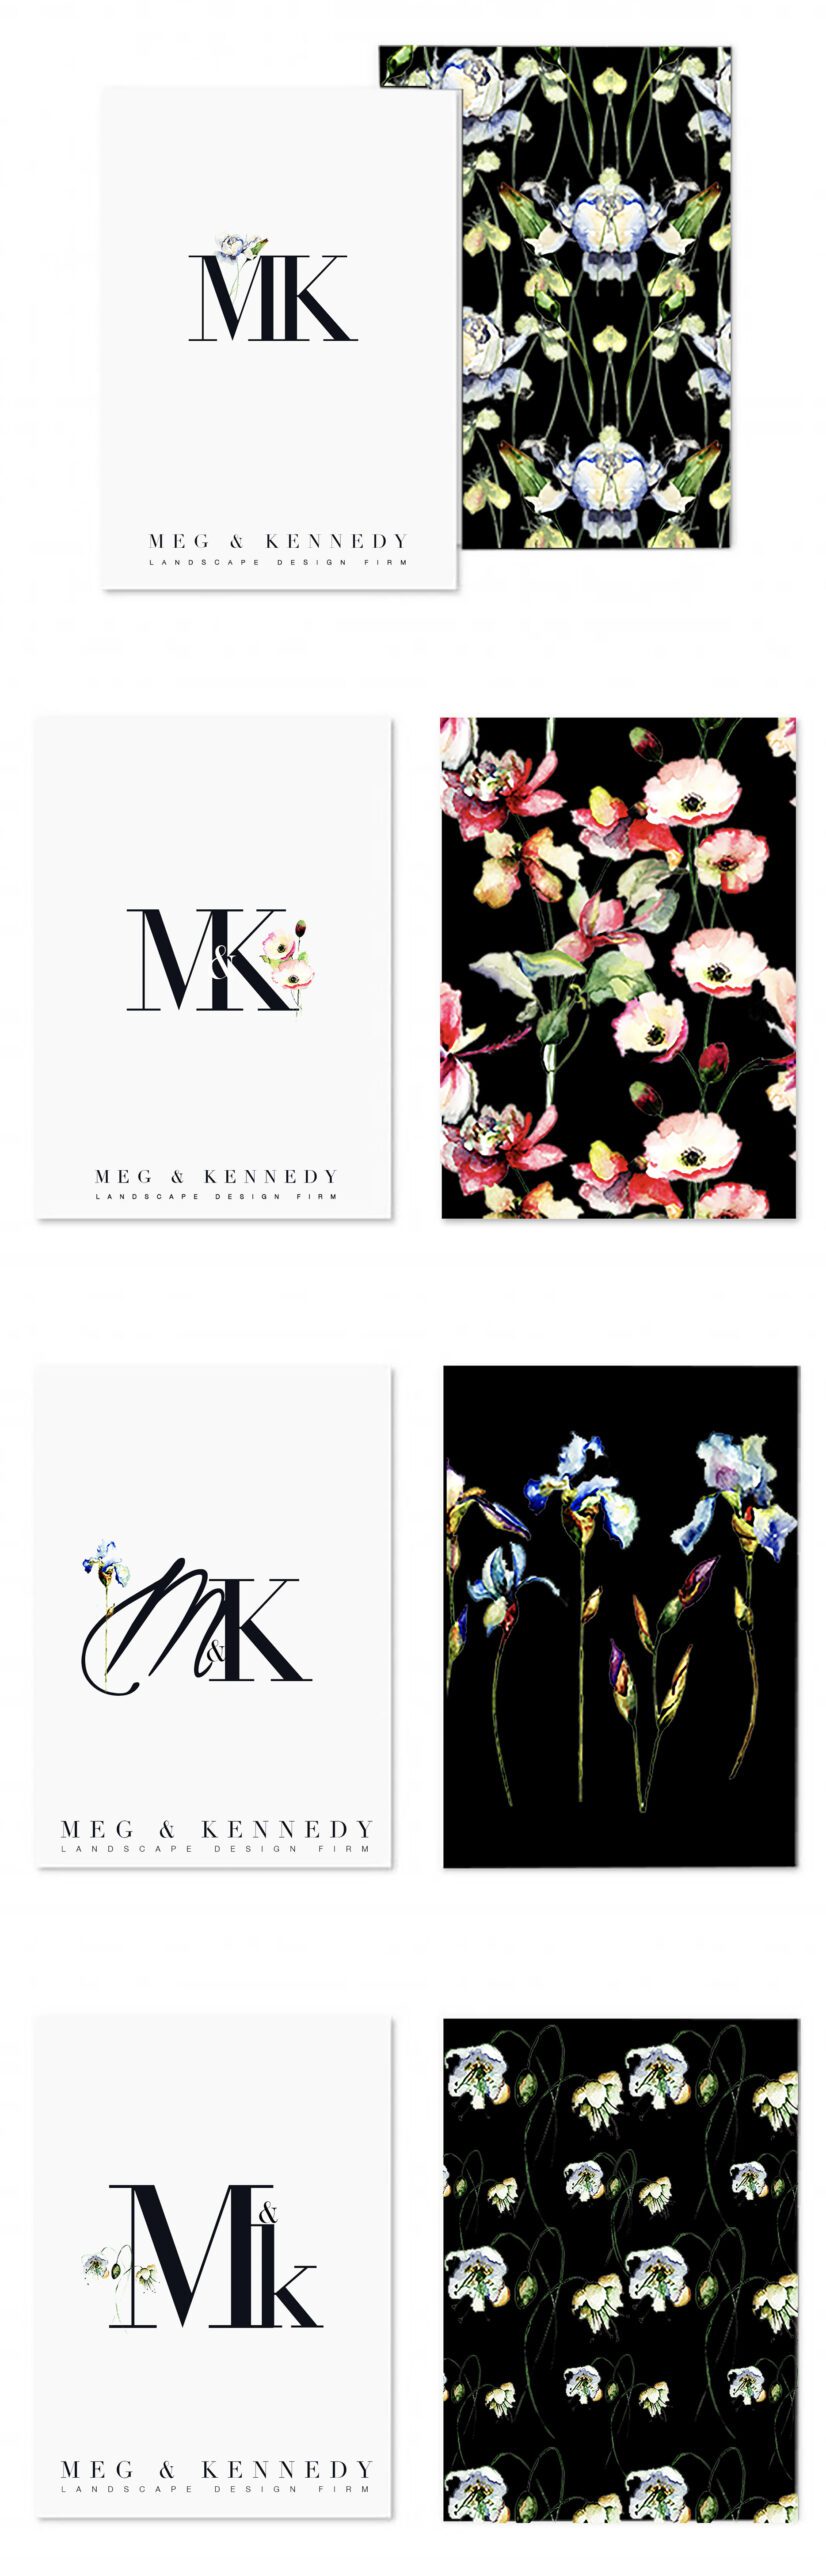 Oliver-Spence-Creative-Client-MK-Brand-Style-Cards